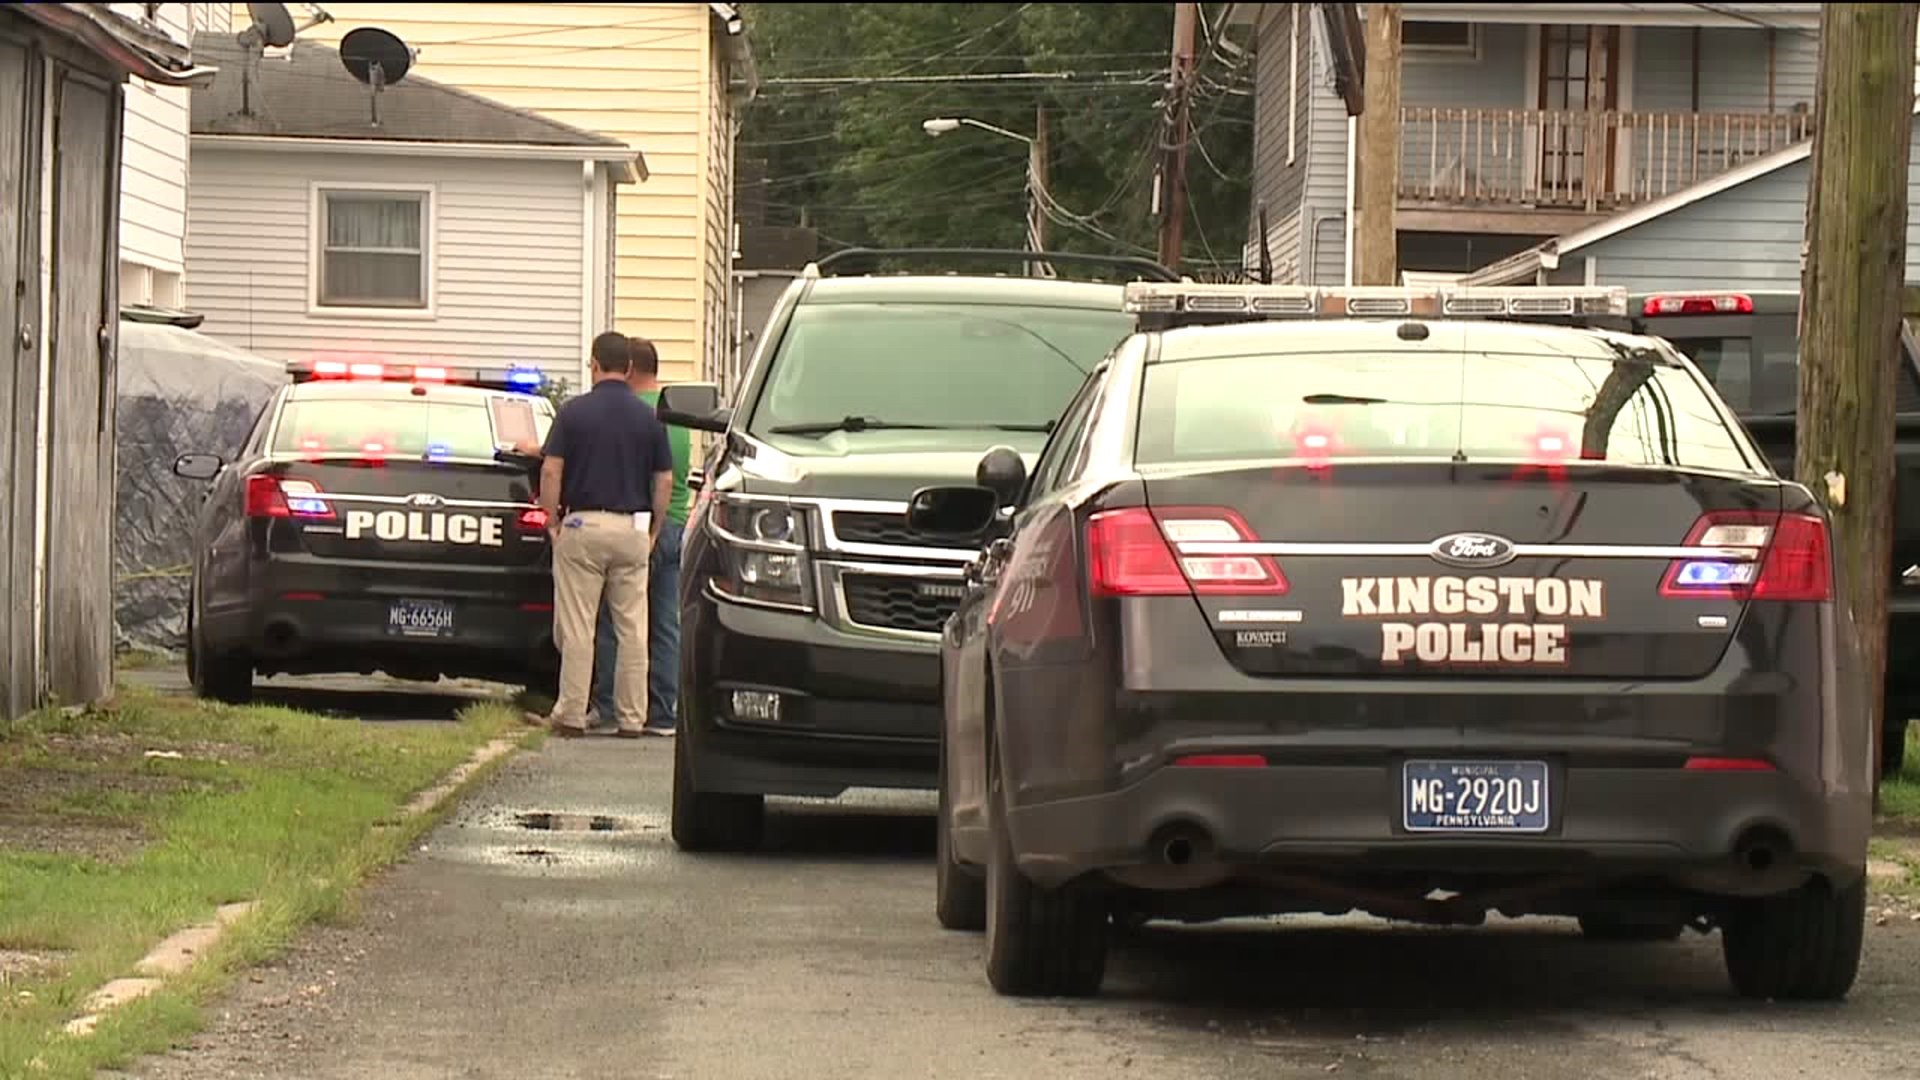 Suspicious Body Leads to Police Investigation in Kingston